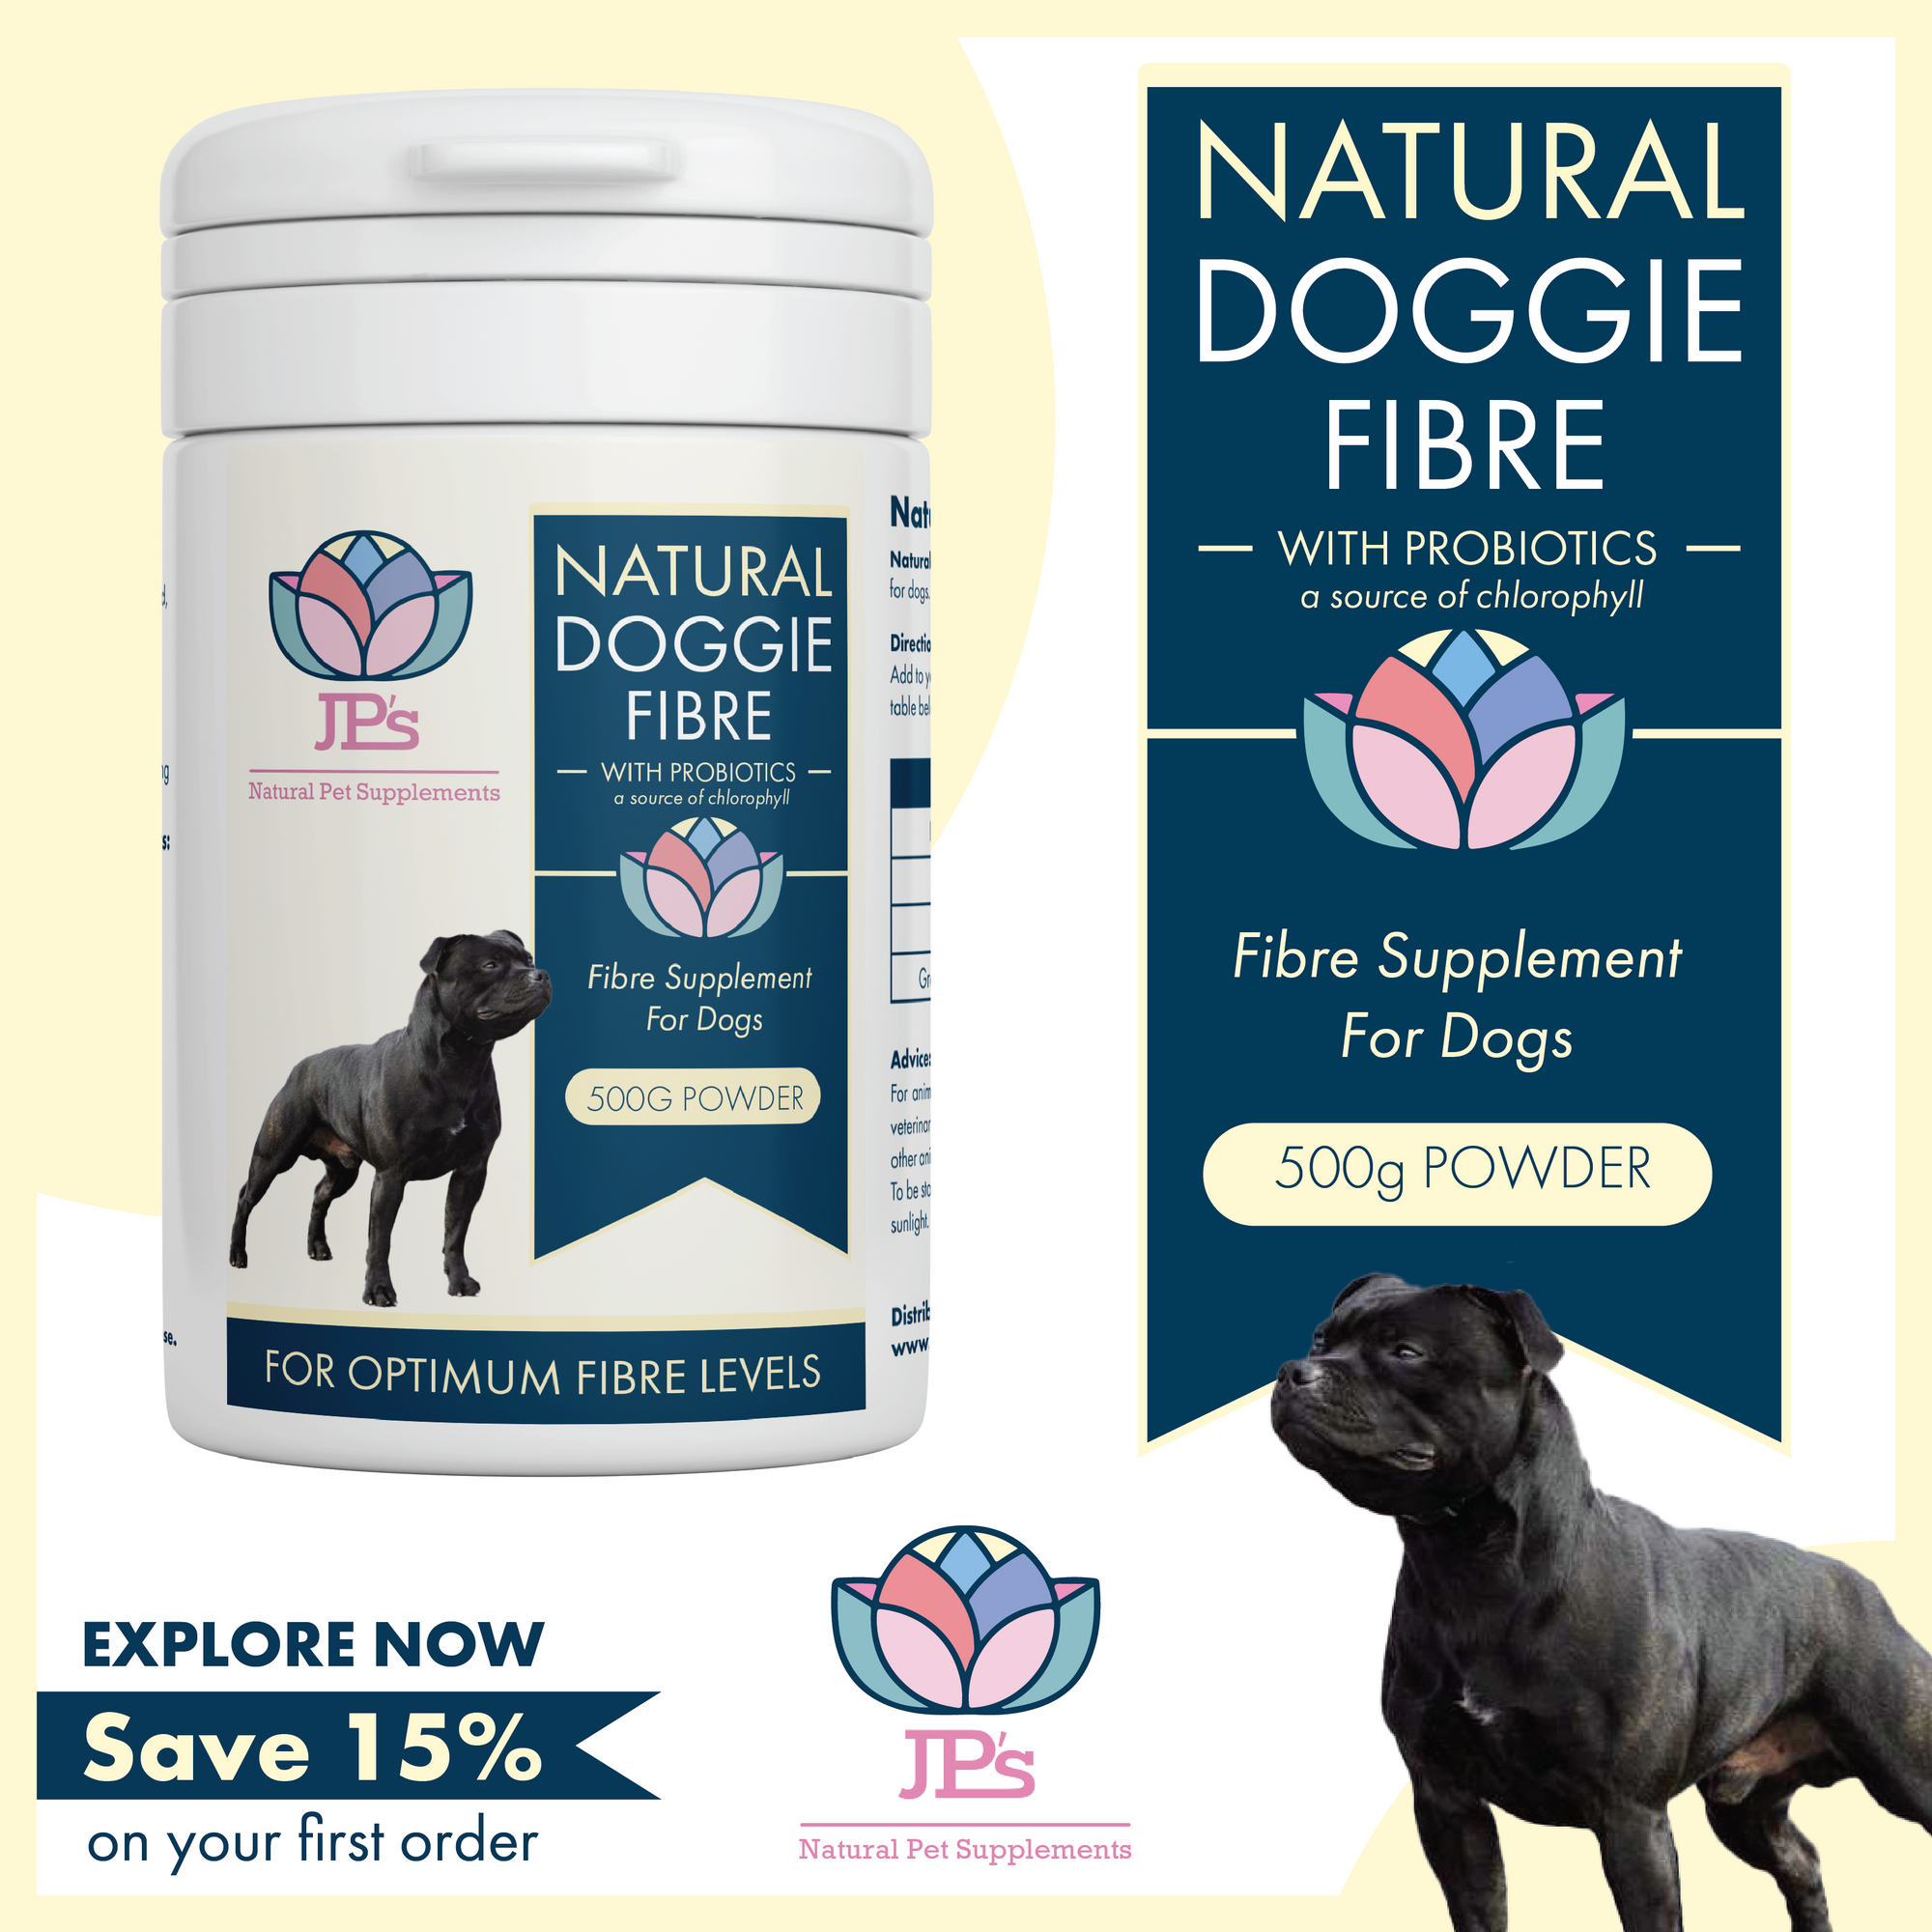 Natural fibre supplement with probiotics for dogs